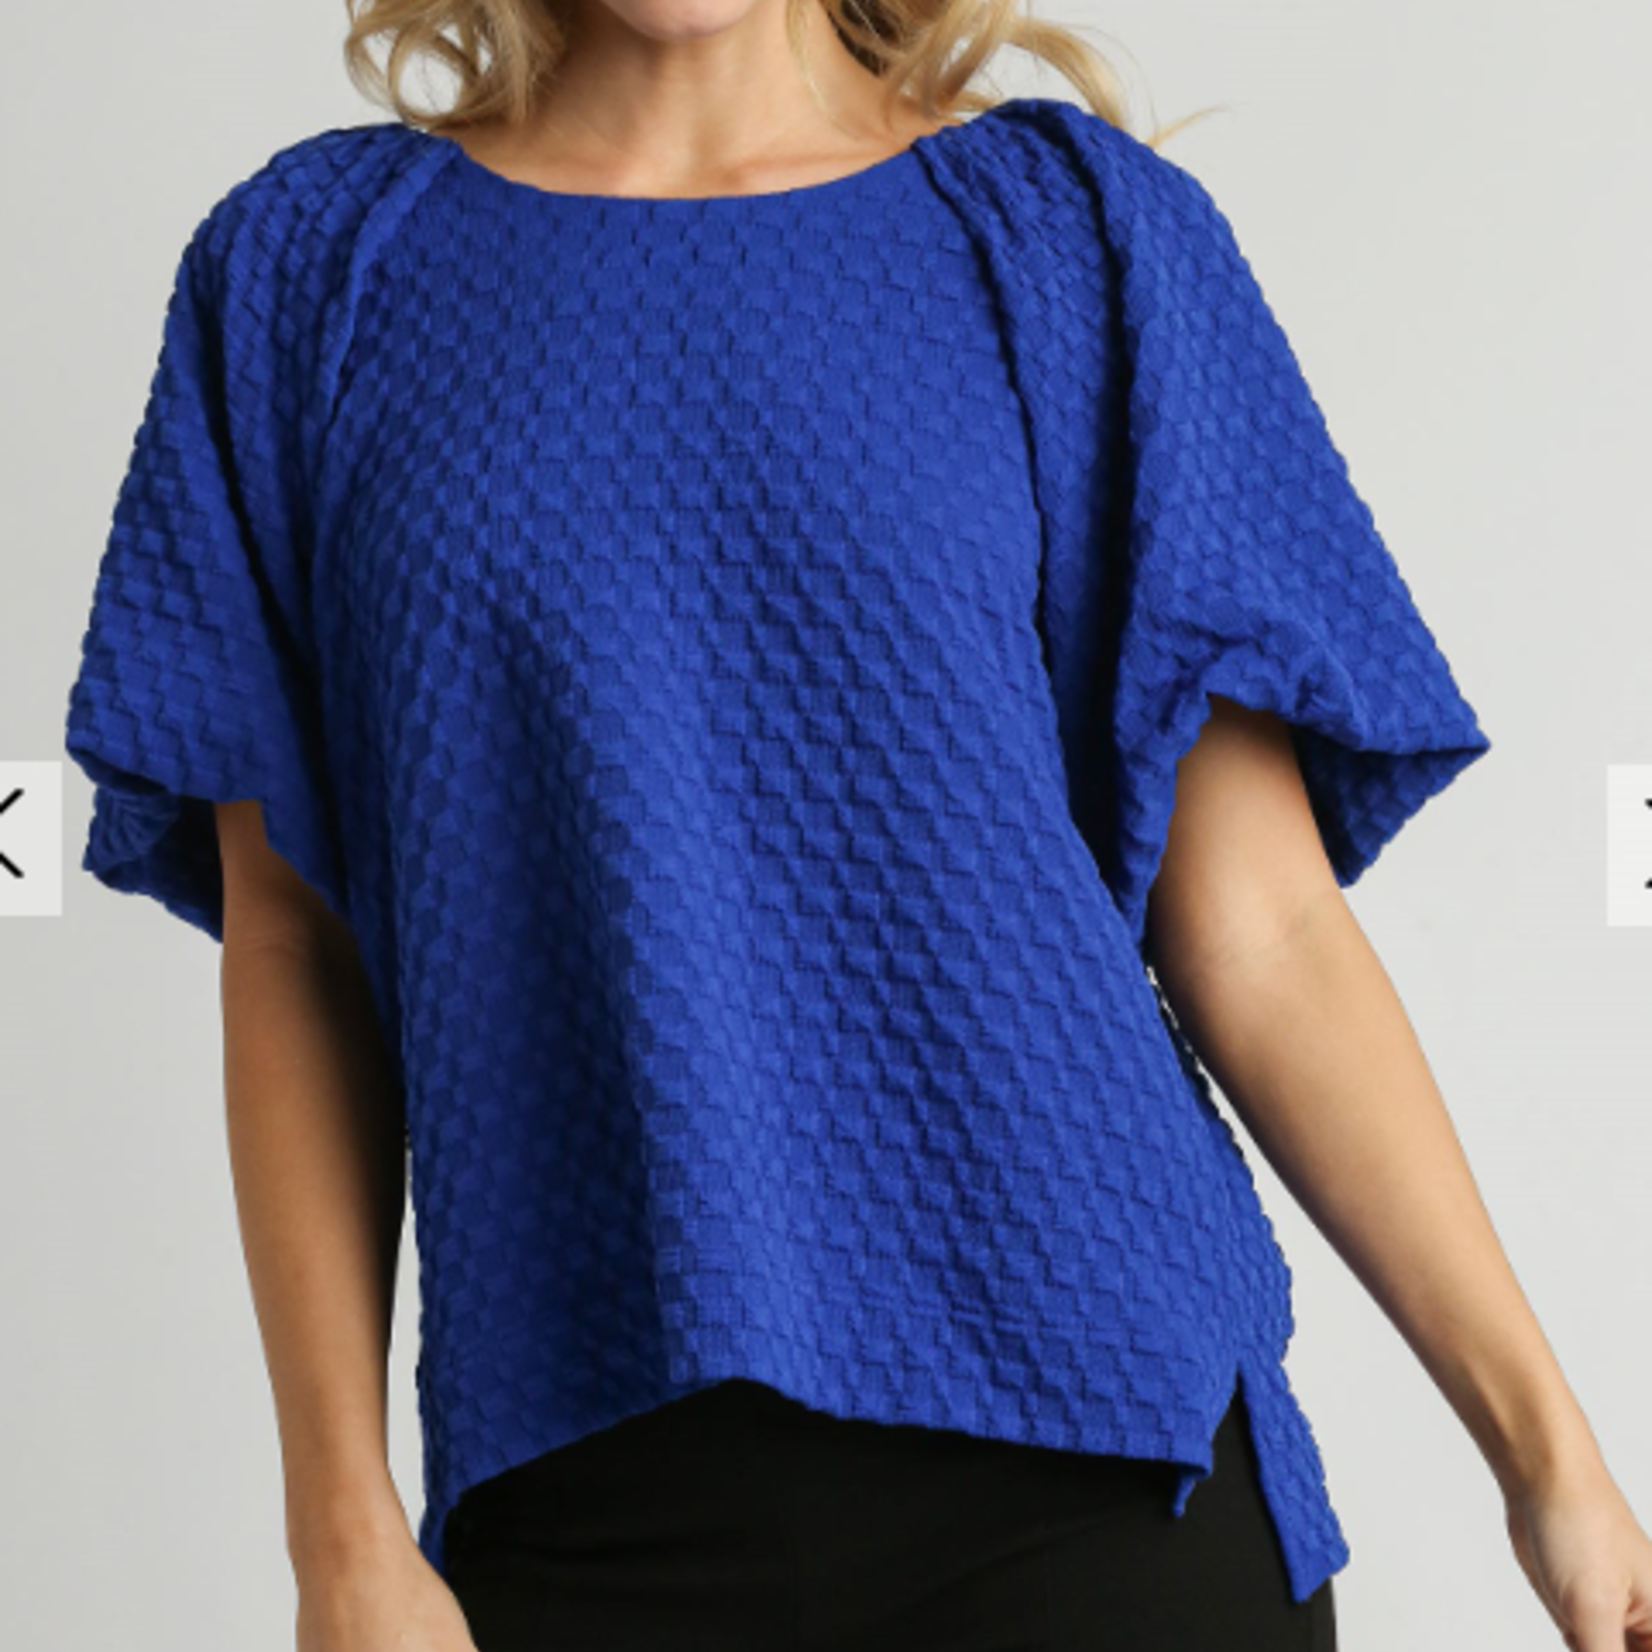 Boxy Cut Top with Round Neck and Side Slit